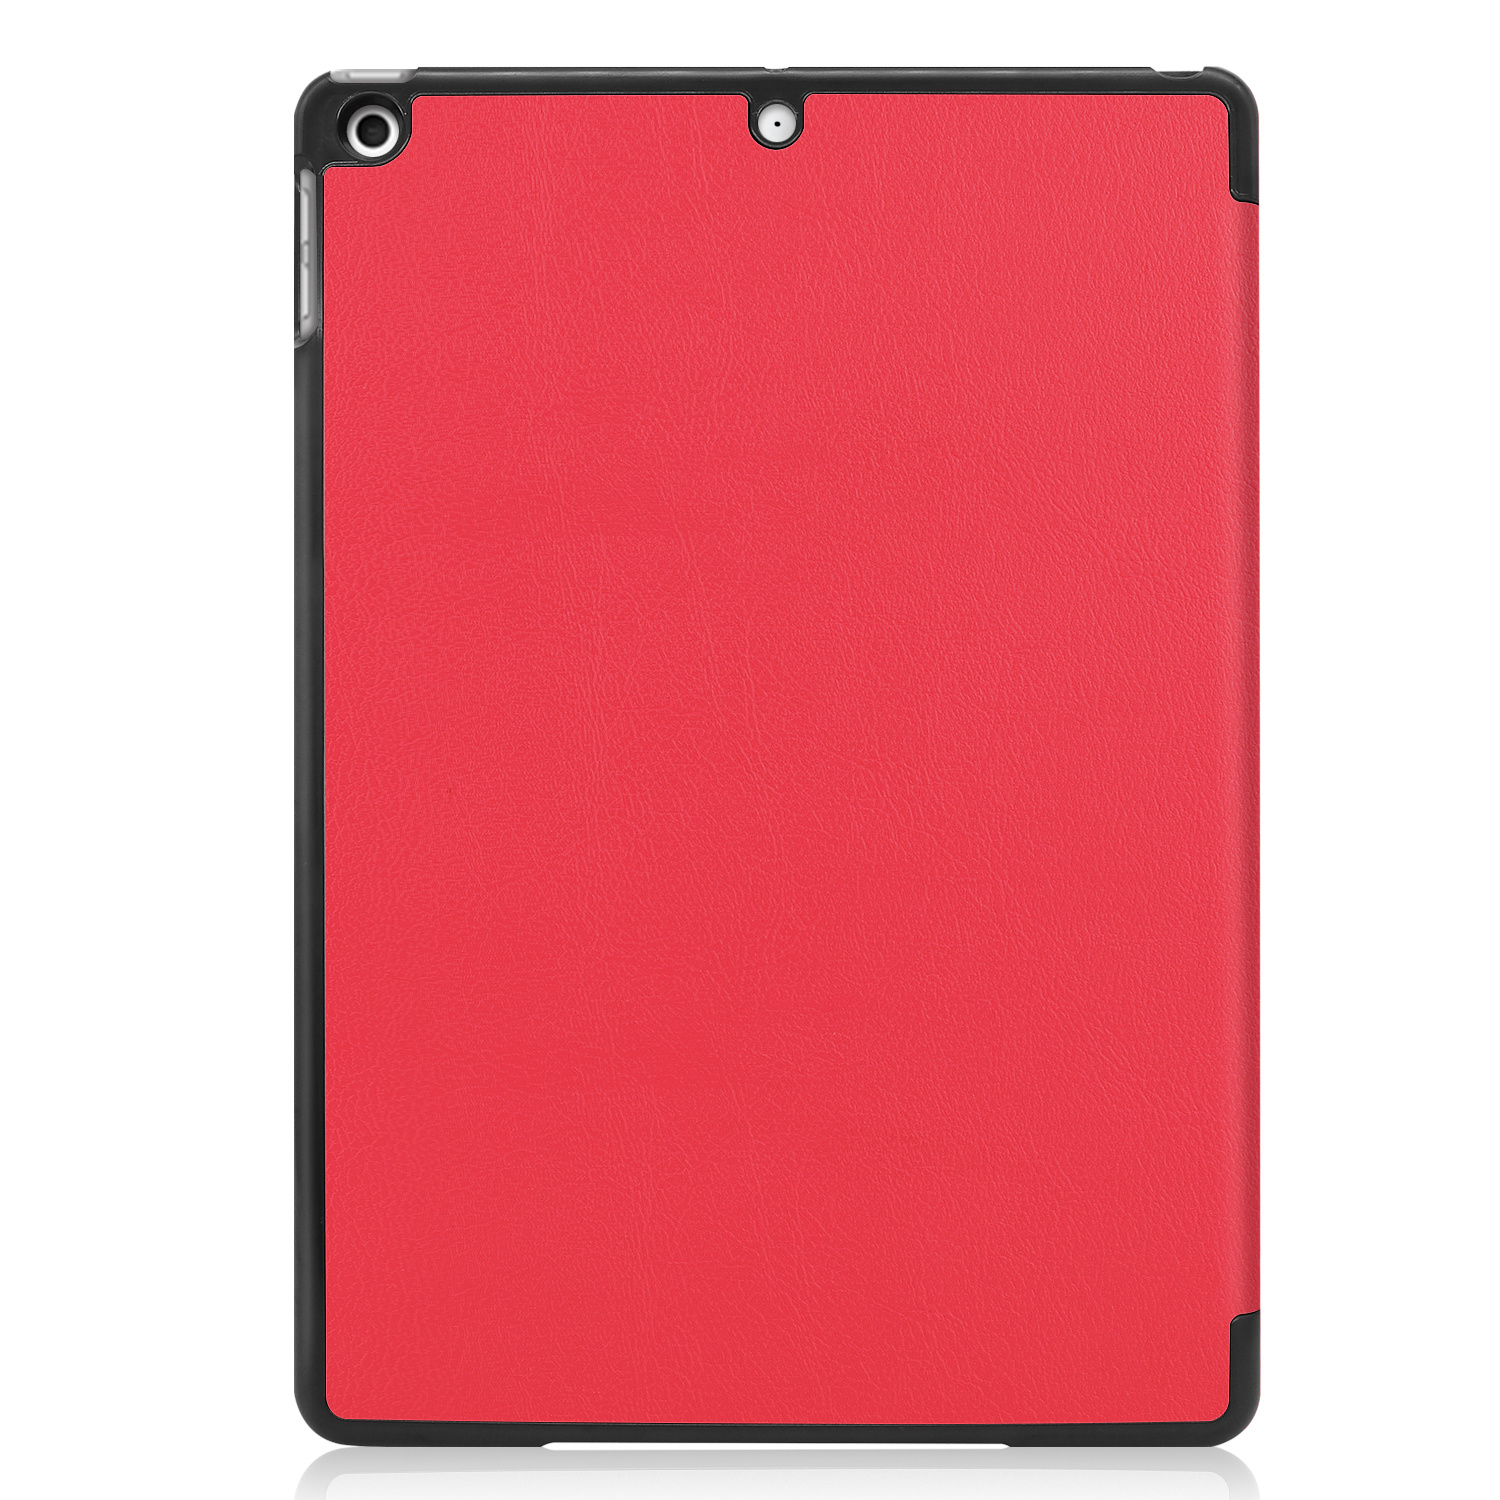 Nomfy iPad 10.2 2020 Hoesje Book Case Hoes - iPad 10.2 2020 Hoes Hardcover Case Hoesje - Rood